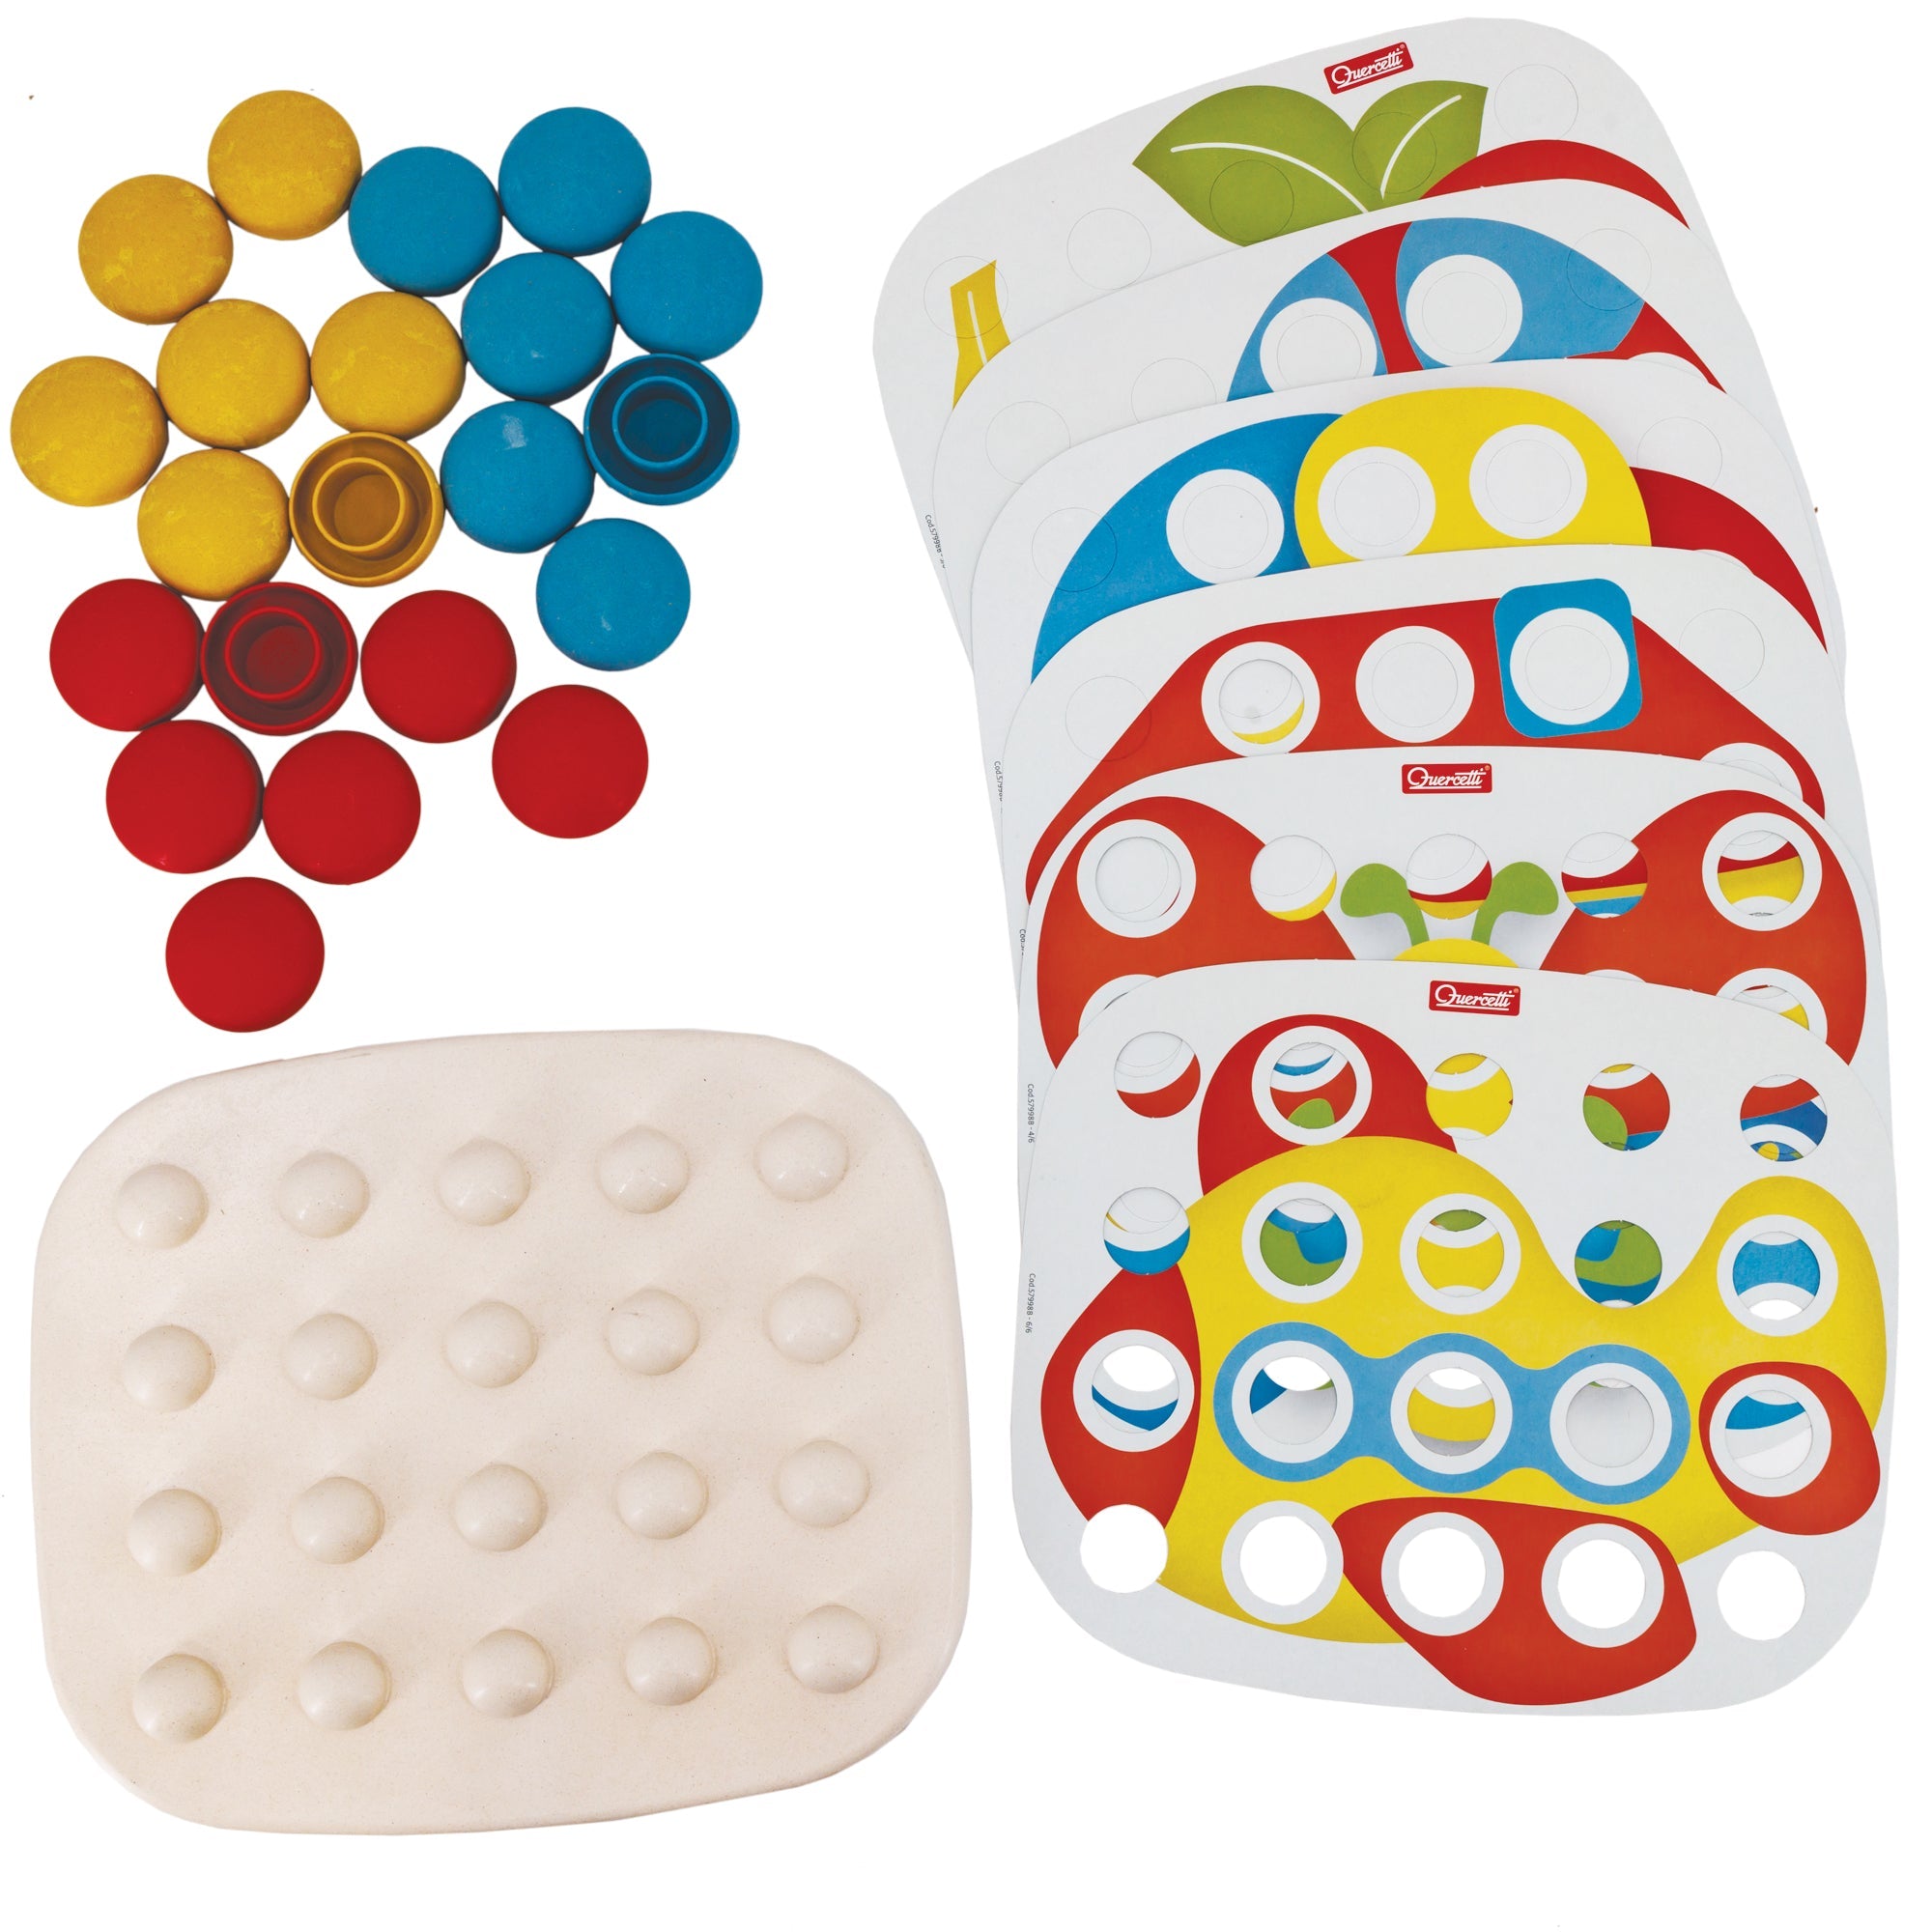 Quercetti Fanta Color Baby set contents. In the top-left are the round pieces that fit over the pegs on the main board below. The pieces are red, yellow, and blue. Below the pieces is the main board. It is rectangle with rounded corners and 20 pegs in a grid of 5 across by 4 down. To the right, fanned out, are 6 picture boards that go over the top of the peg board. You can see a plane, butterfly, apple, and other shapes.